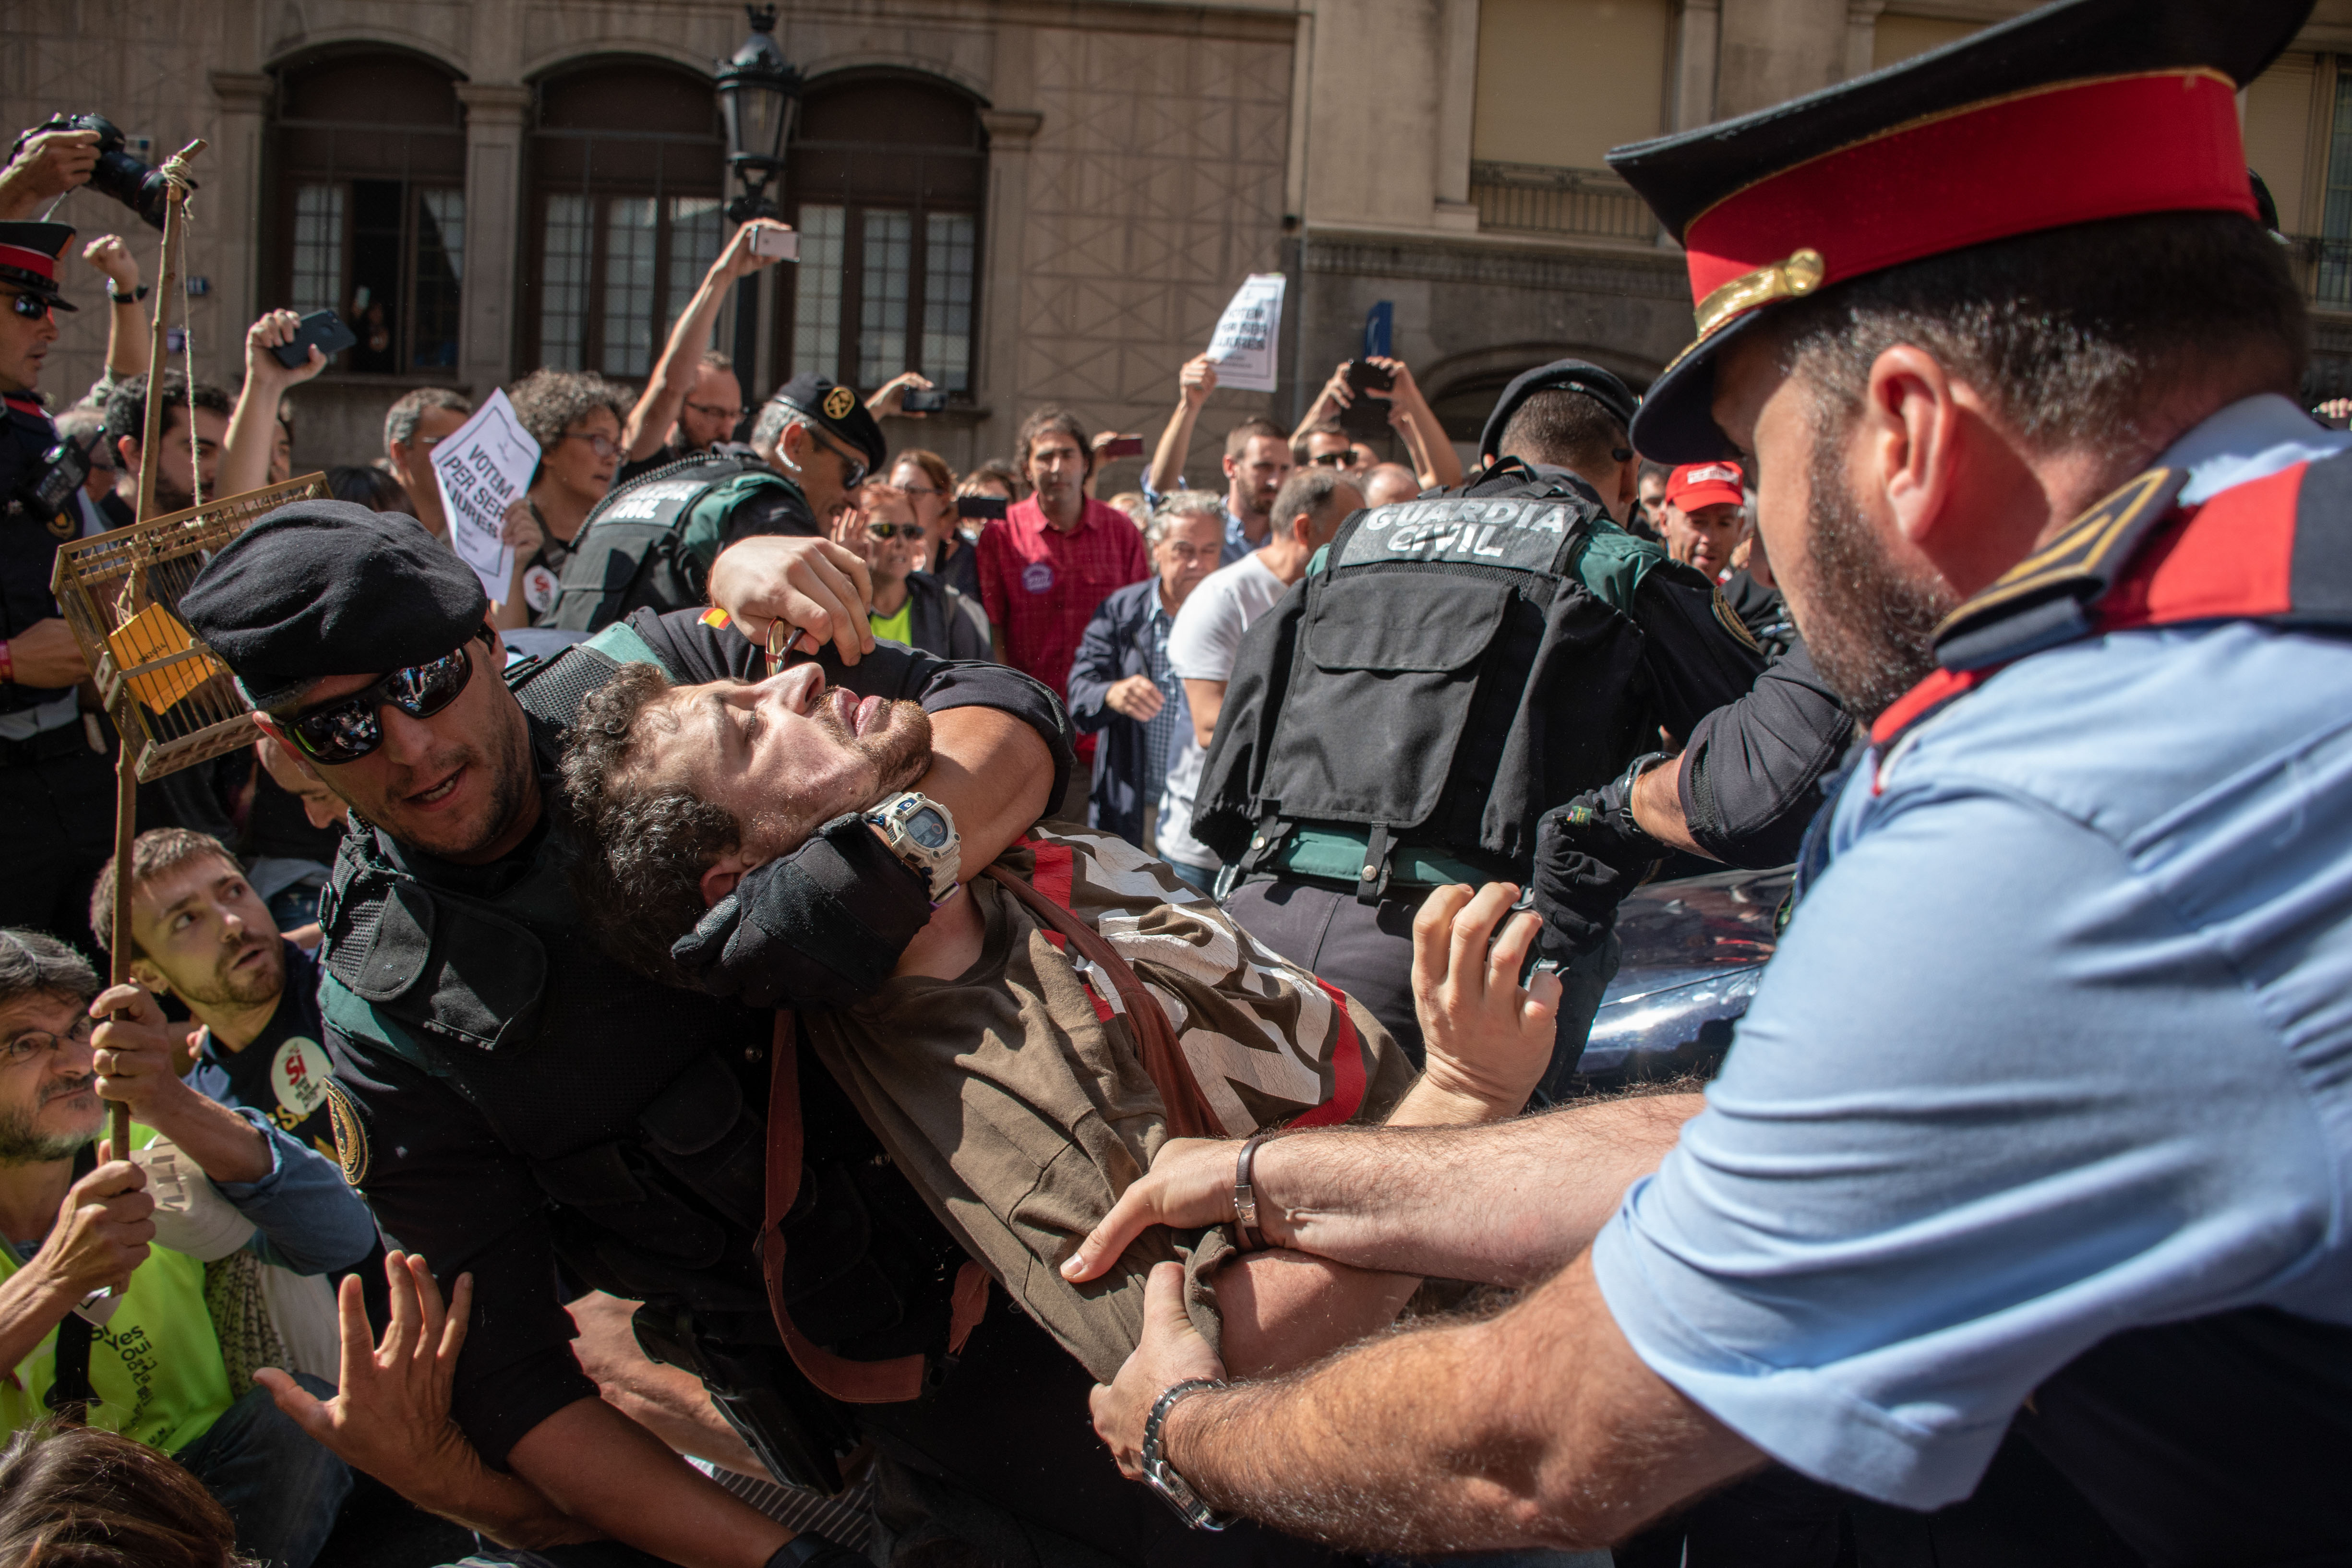 Police grab a man during a protest.